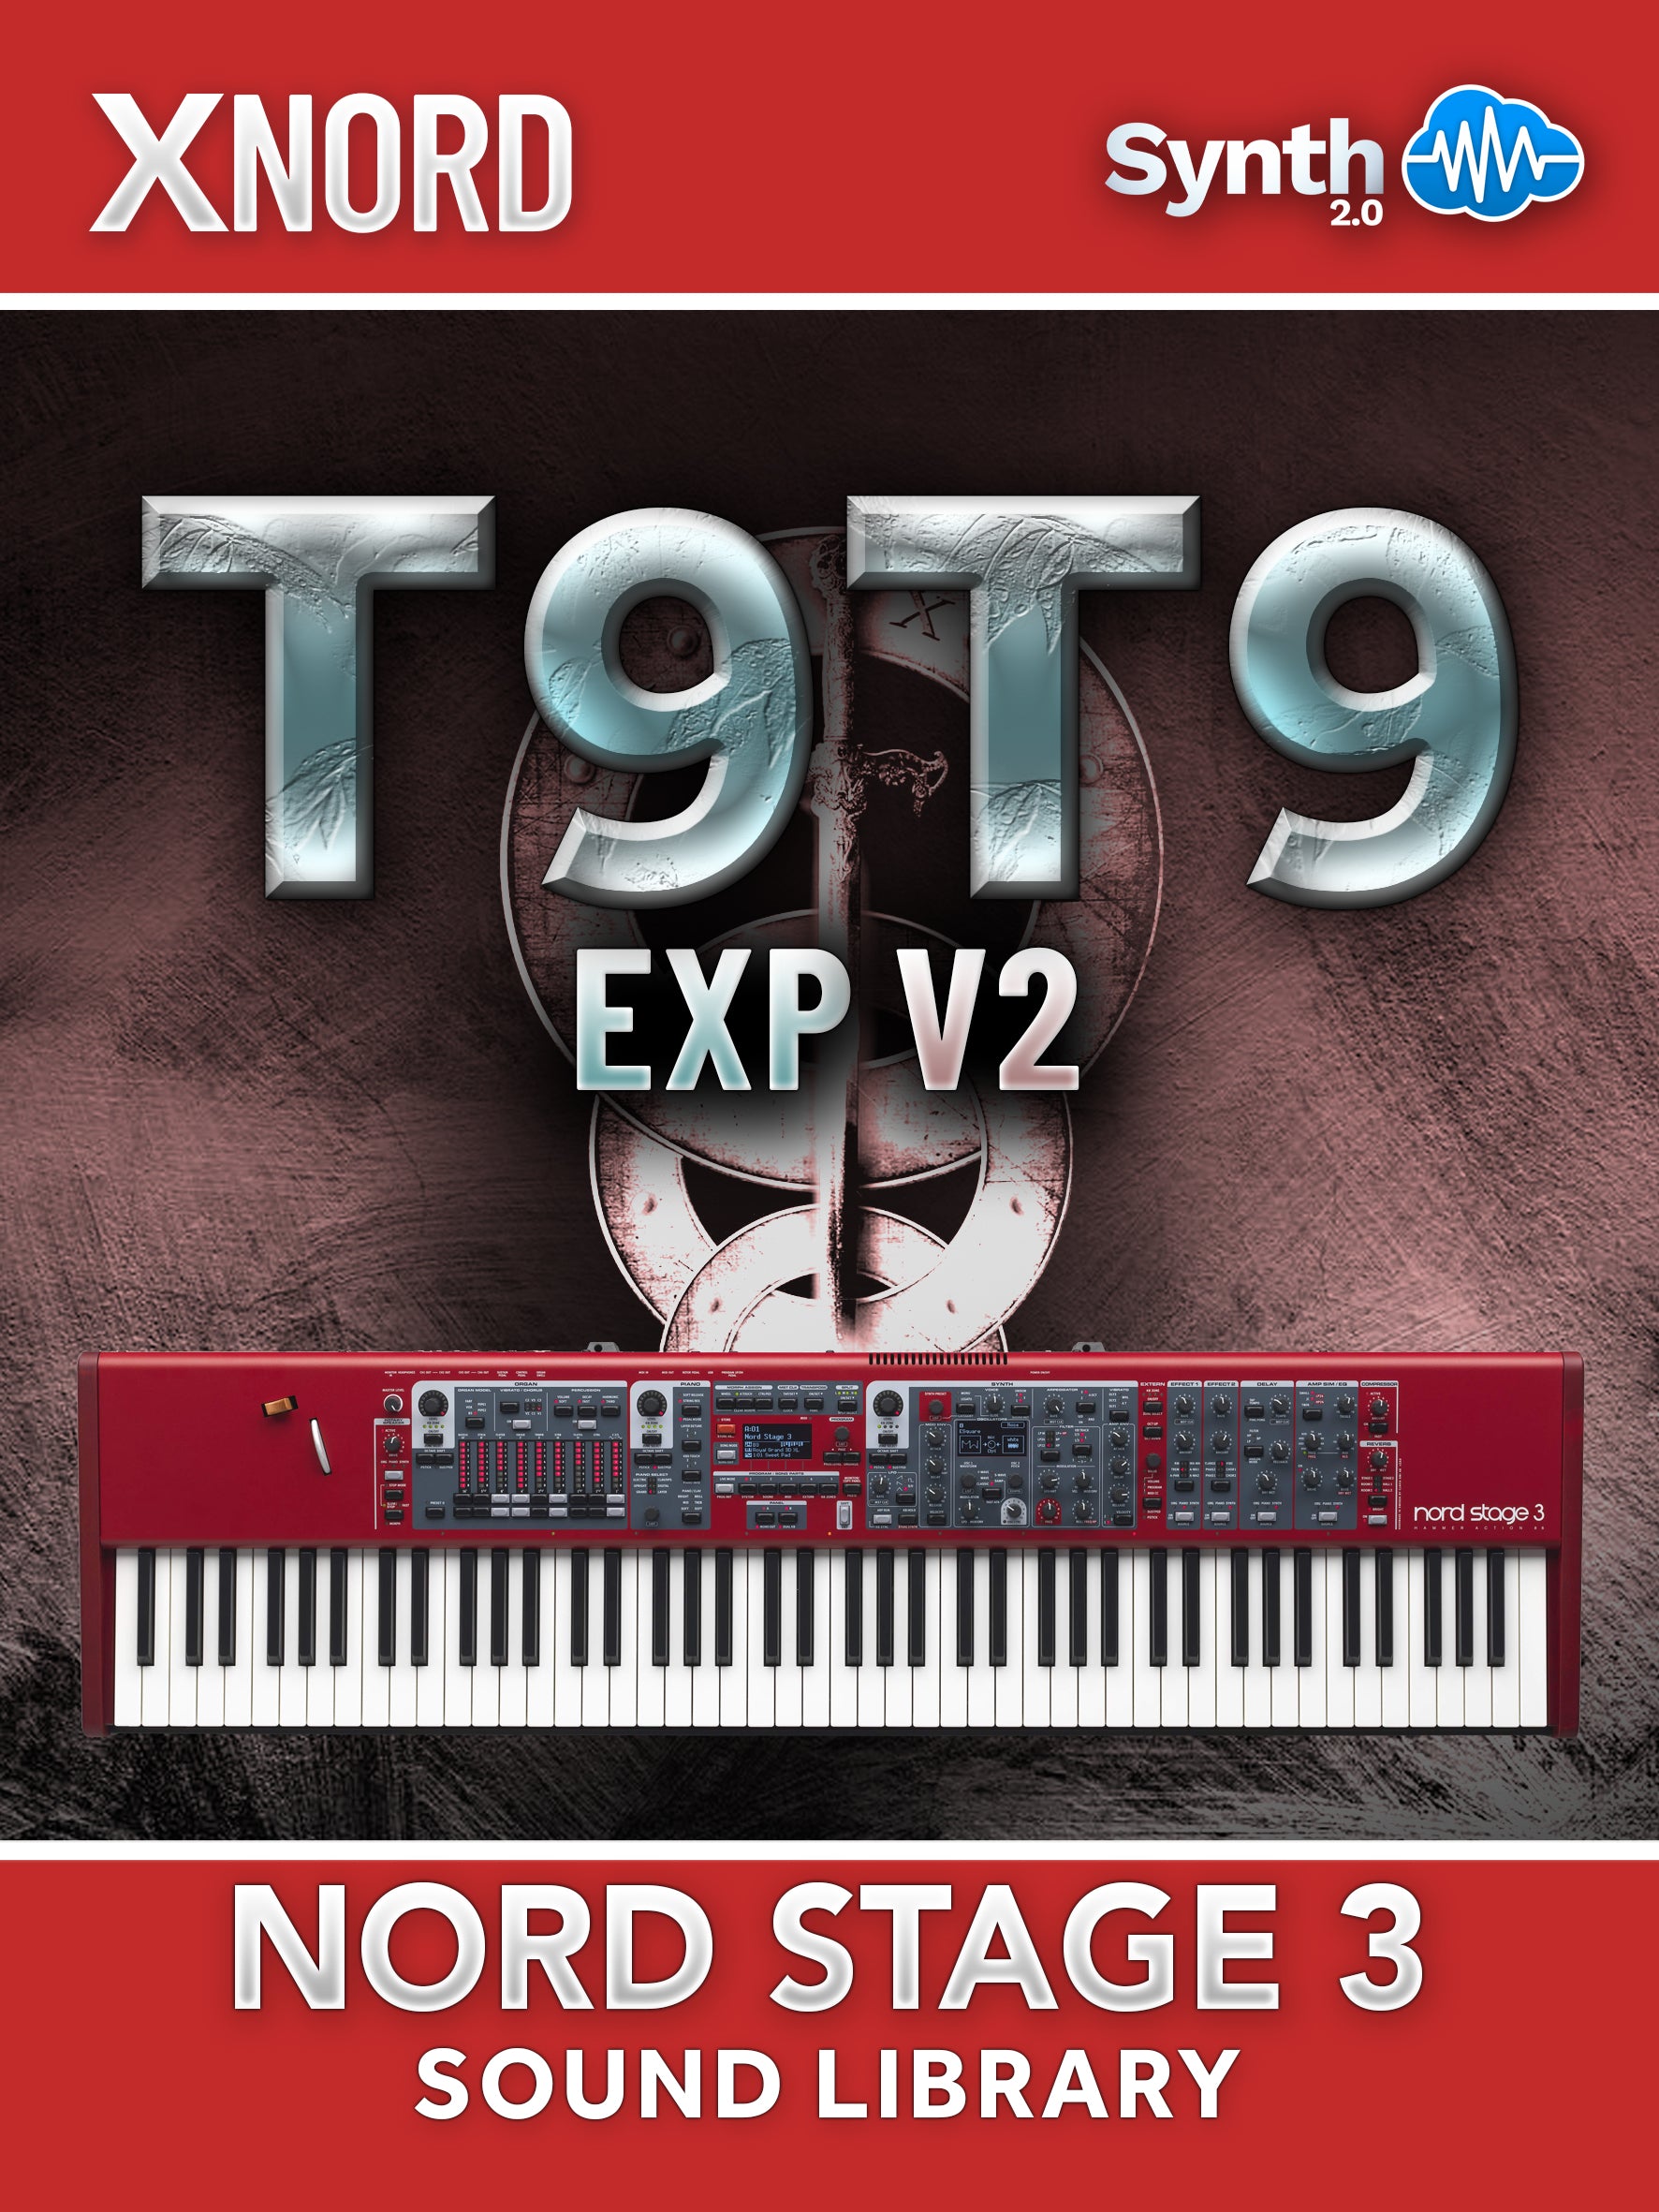 FPL043 - ( Bundle ) - T9T9 Cover Pack + T9T9 Cover EXP V2 - Nord Stage 3